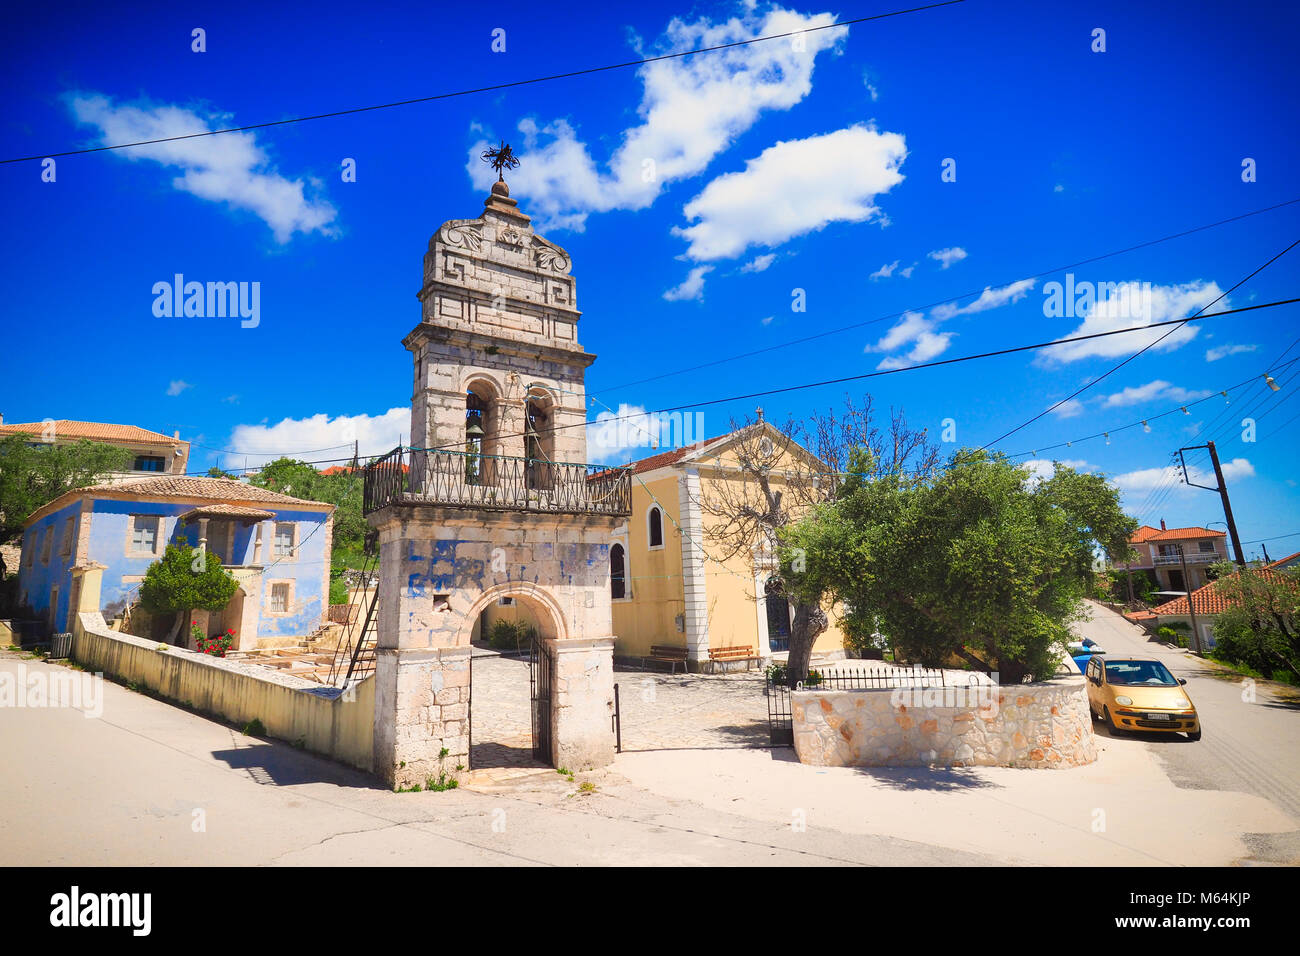 Old church in traditional greek village on the island of Zakynthos Stock Photo